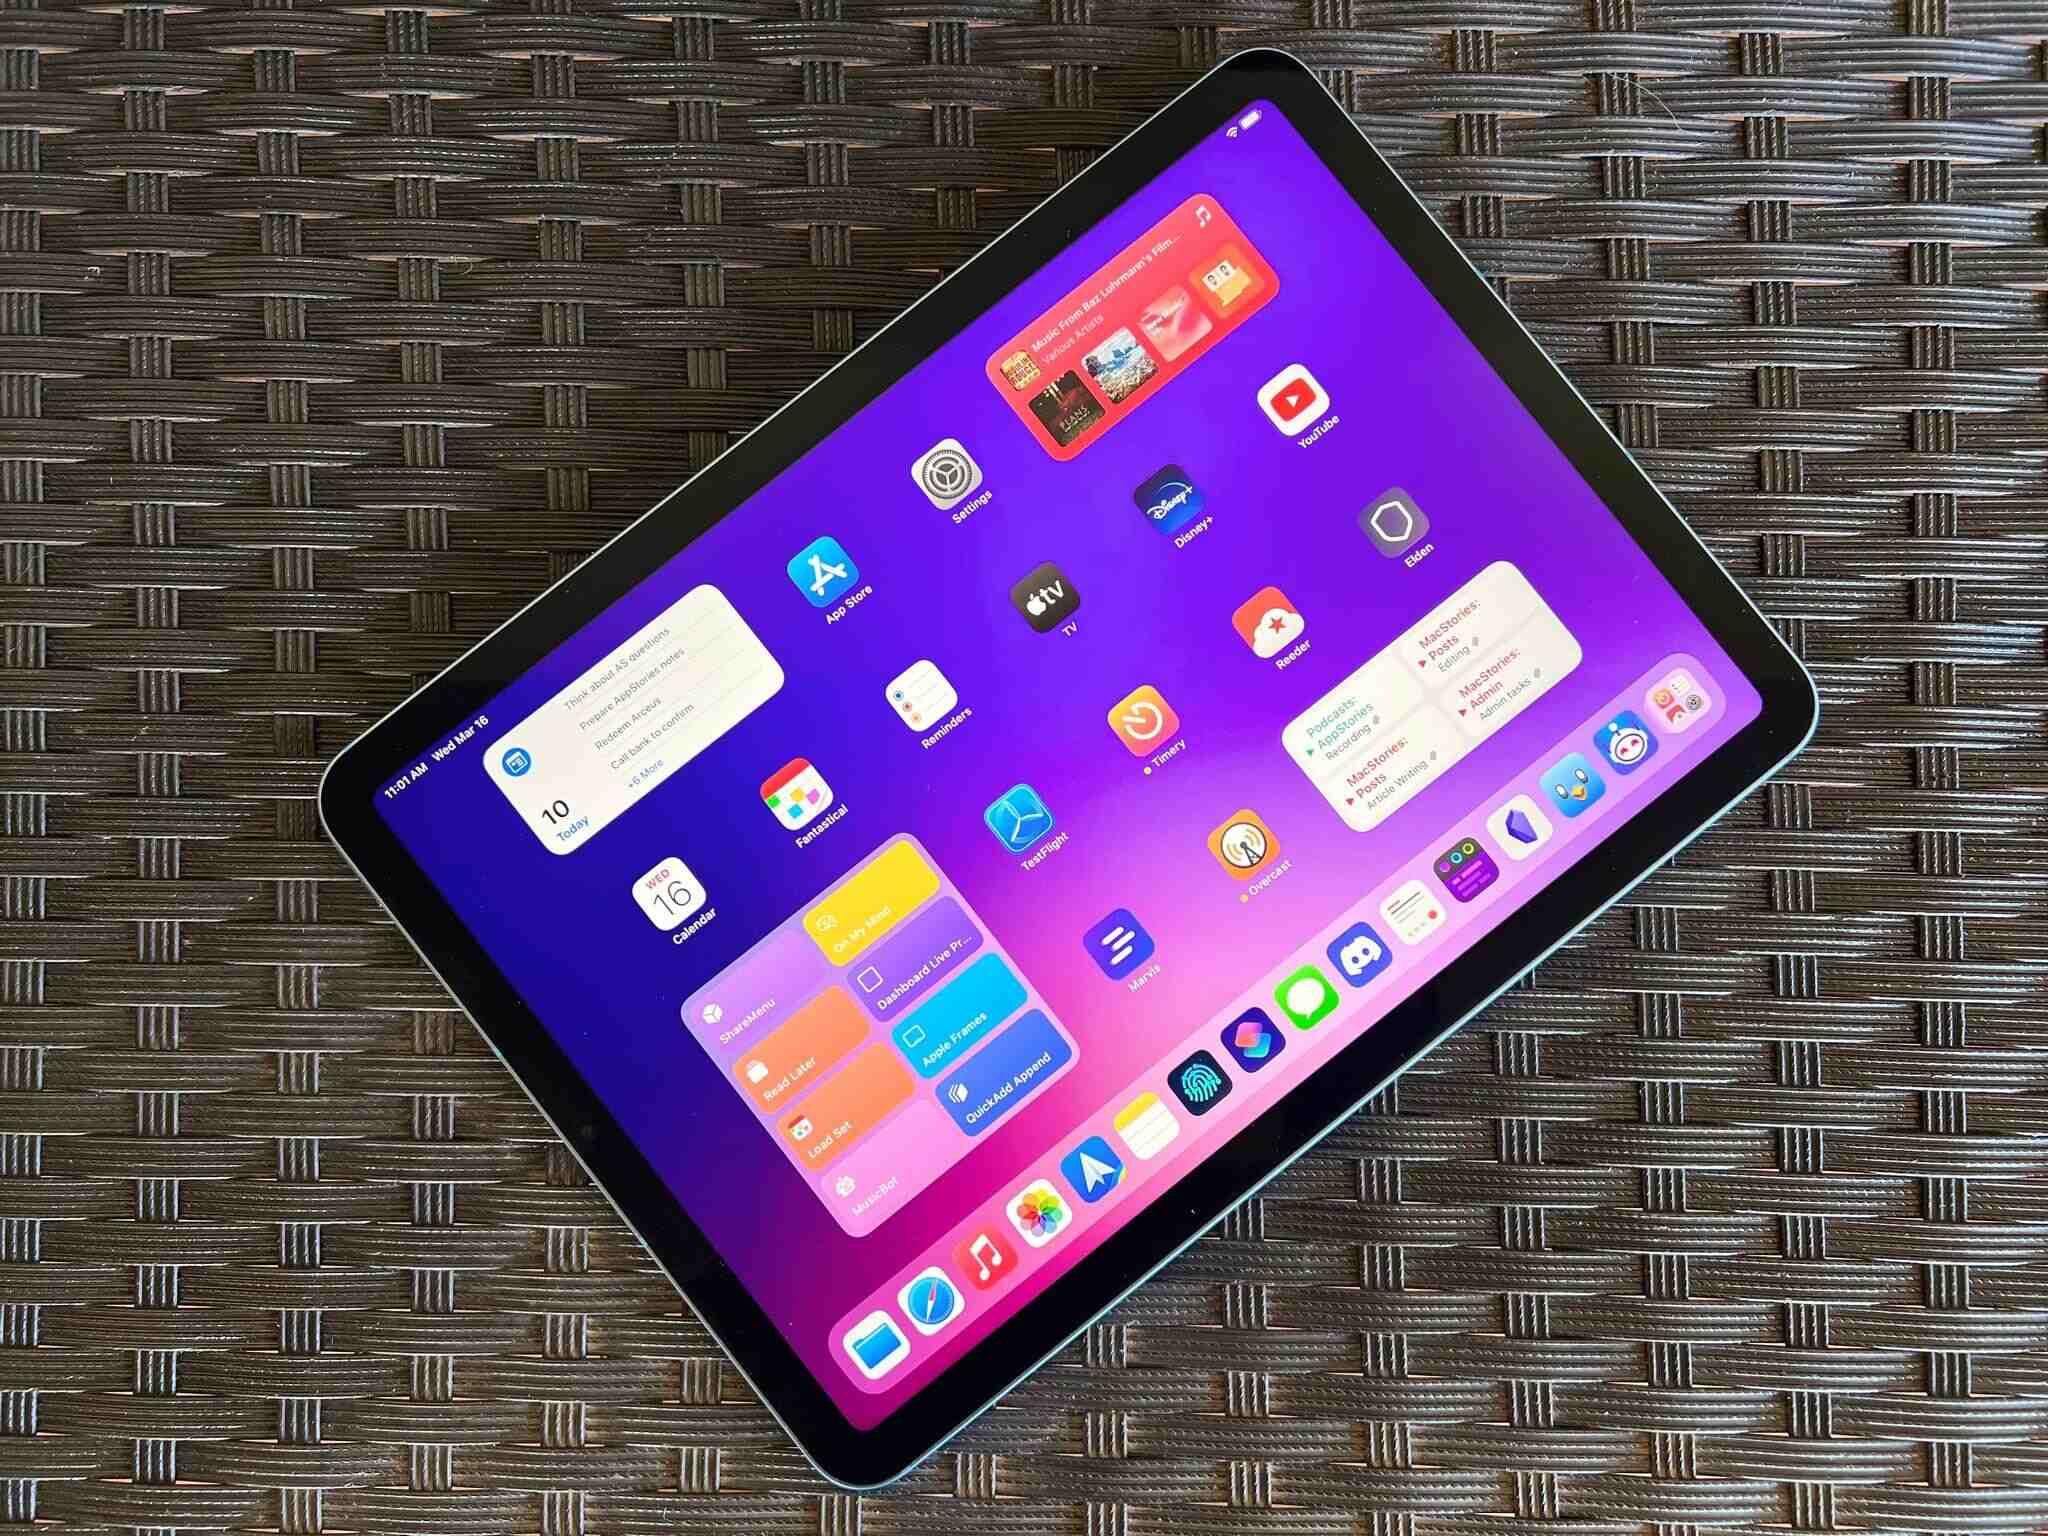 apples-2022-ipad-lineup-misses-what-used-to-make-it-great